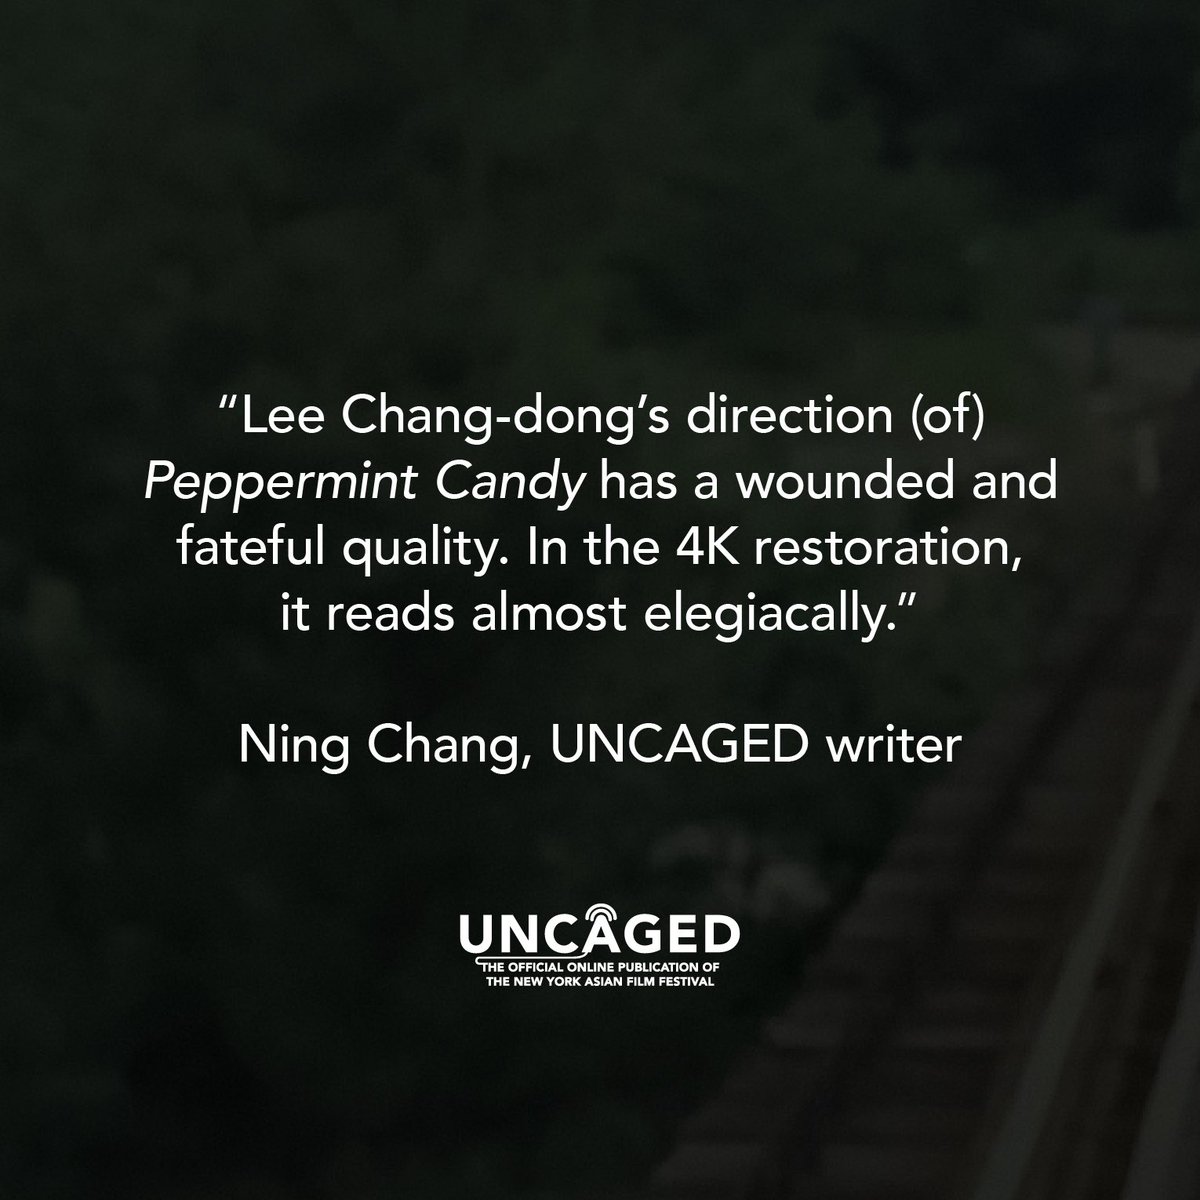 Lee Chang-dong’s film, “Peppermint Candy,” uses reverse chronology to reveal the ways historical forces mold individual fates, with a 4K restoration shown at @Metrograph enhancing its poignant, haunting beauty. Read the UNCAGED review by Ning Chang here: bit.ly/3WwJ73U